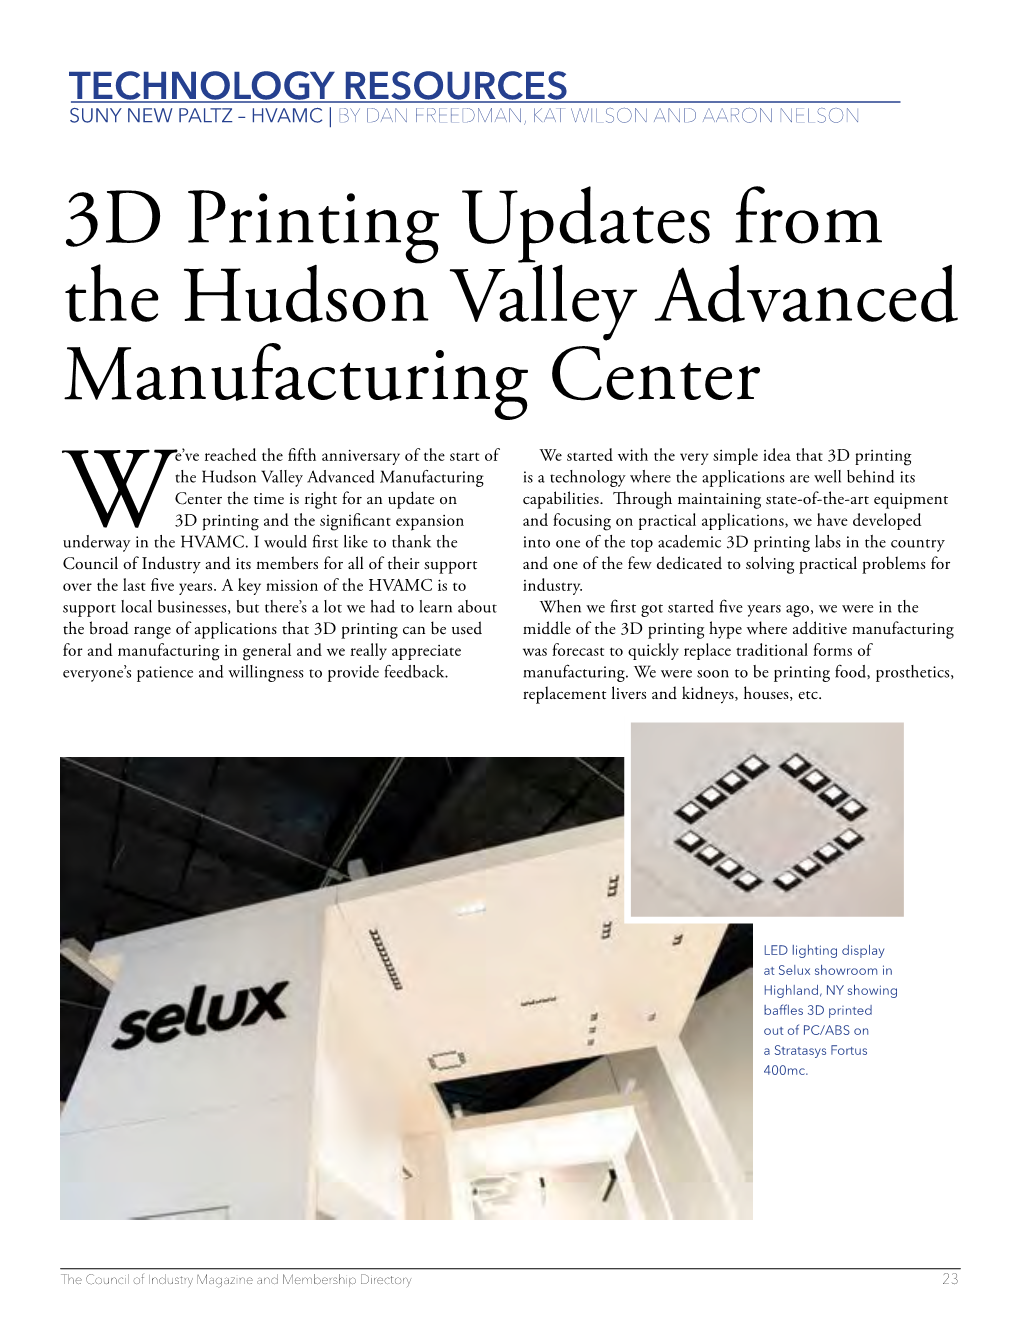 3D Printing Updates from the Hudson Valley Advanced Manufacturing Center